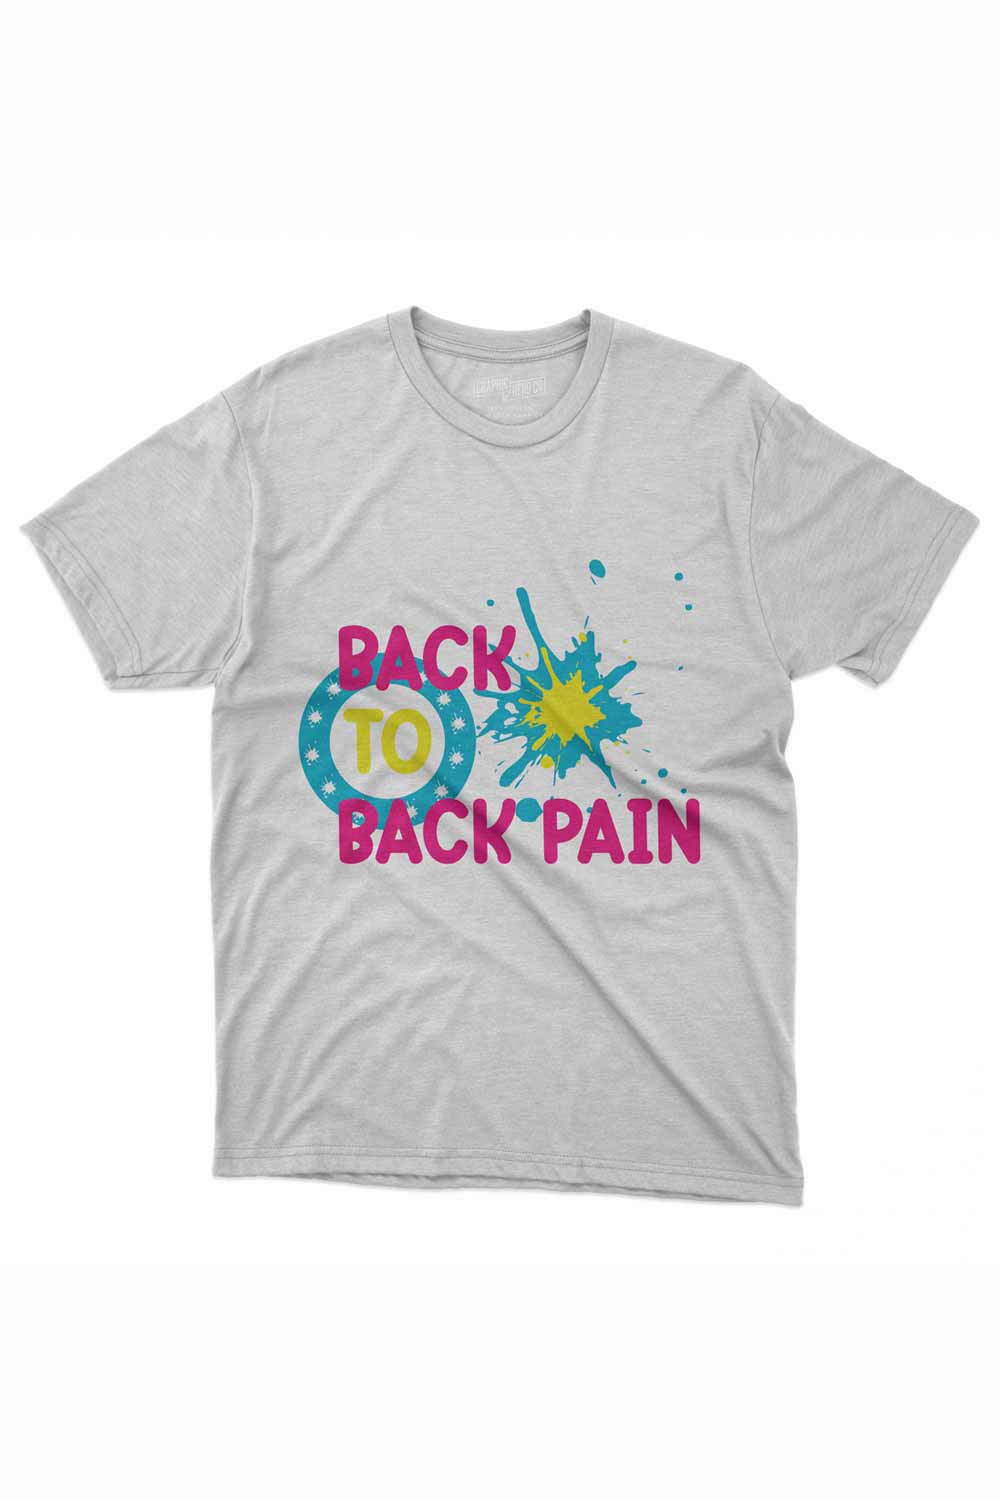 Back to back pain T-Shirt Design pinterest preview image.